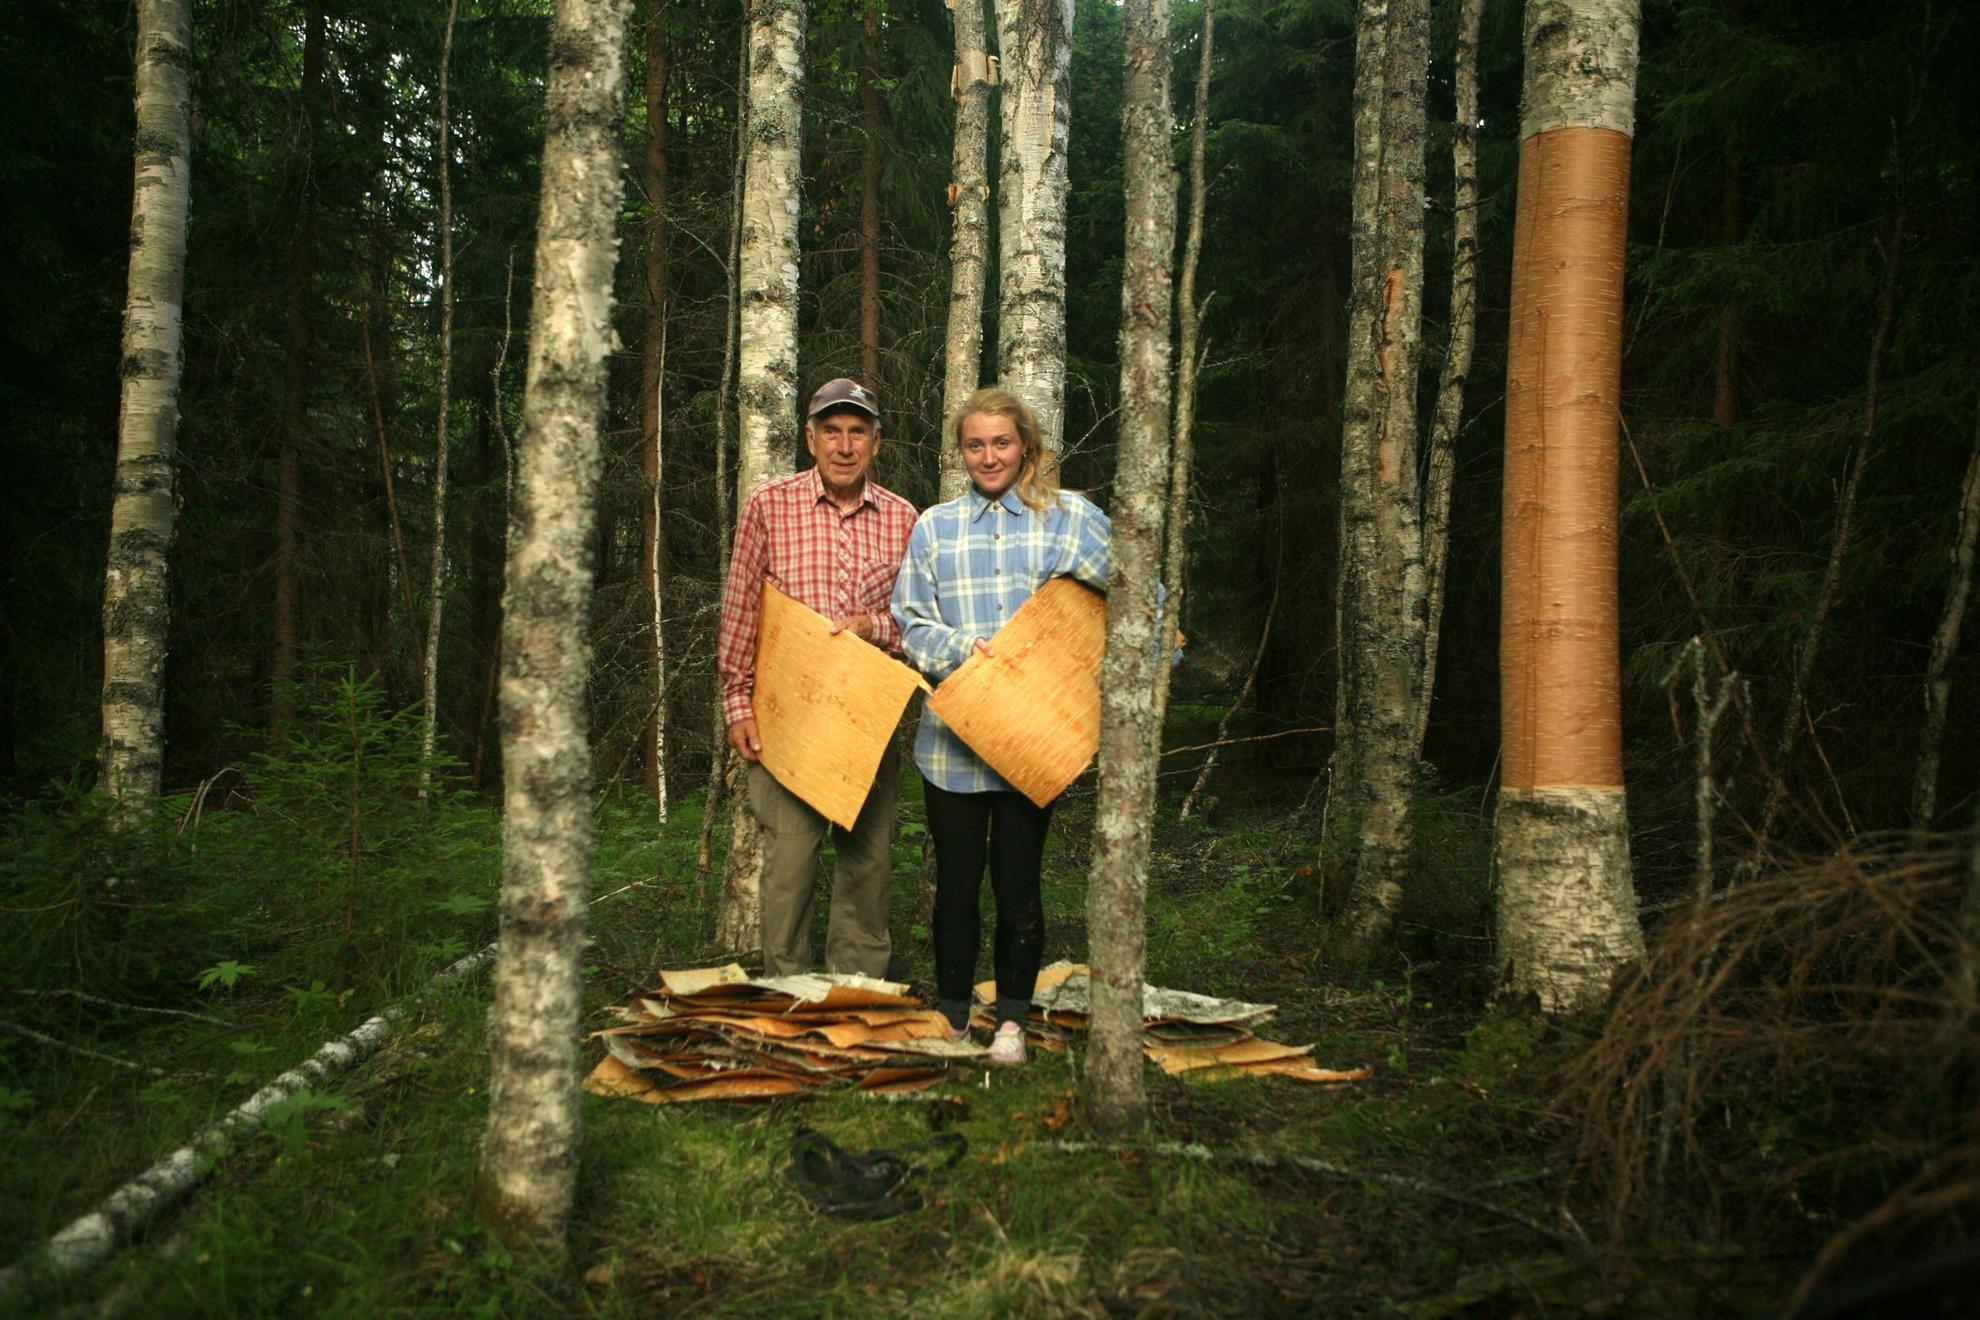 In a forest, a man and a woman are holding onto large pieces of birch bark, with more pieces down on the ground.